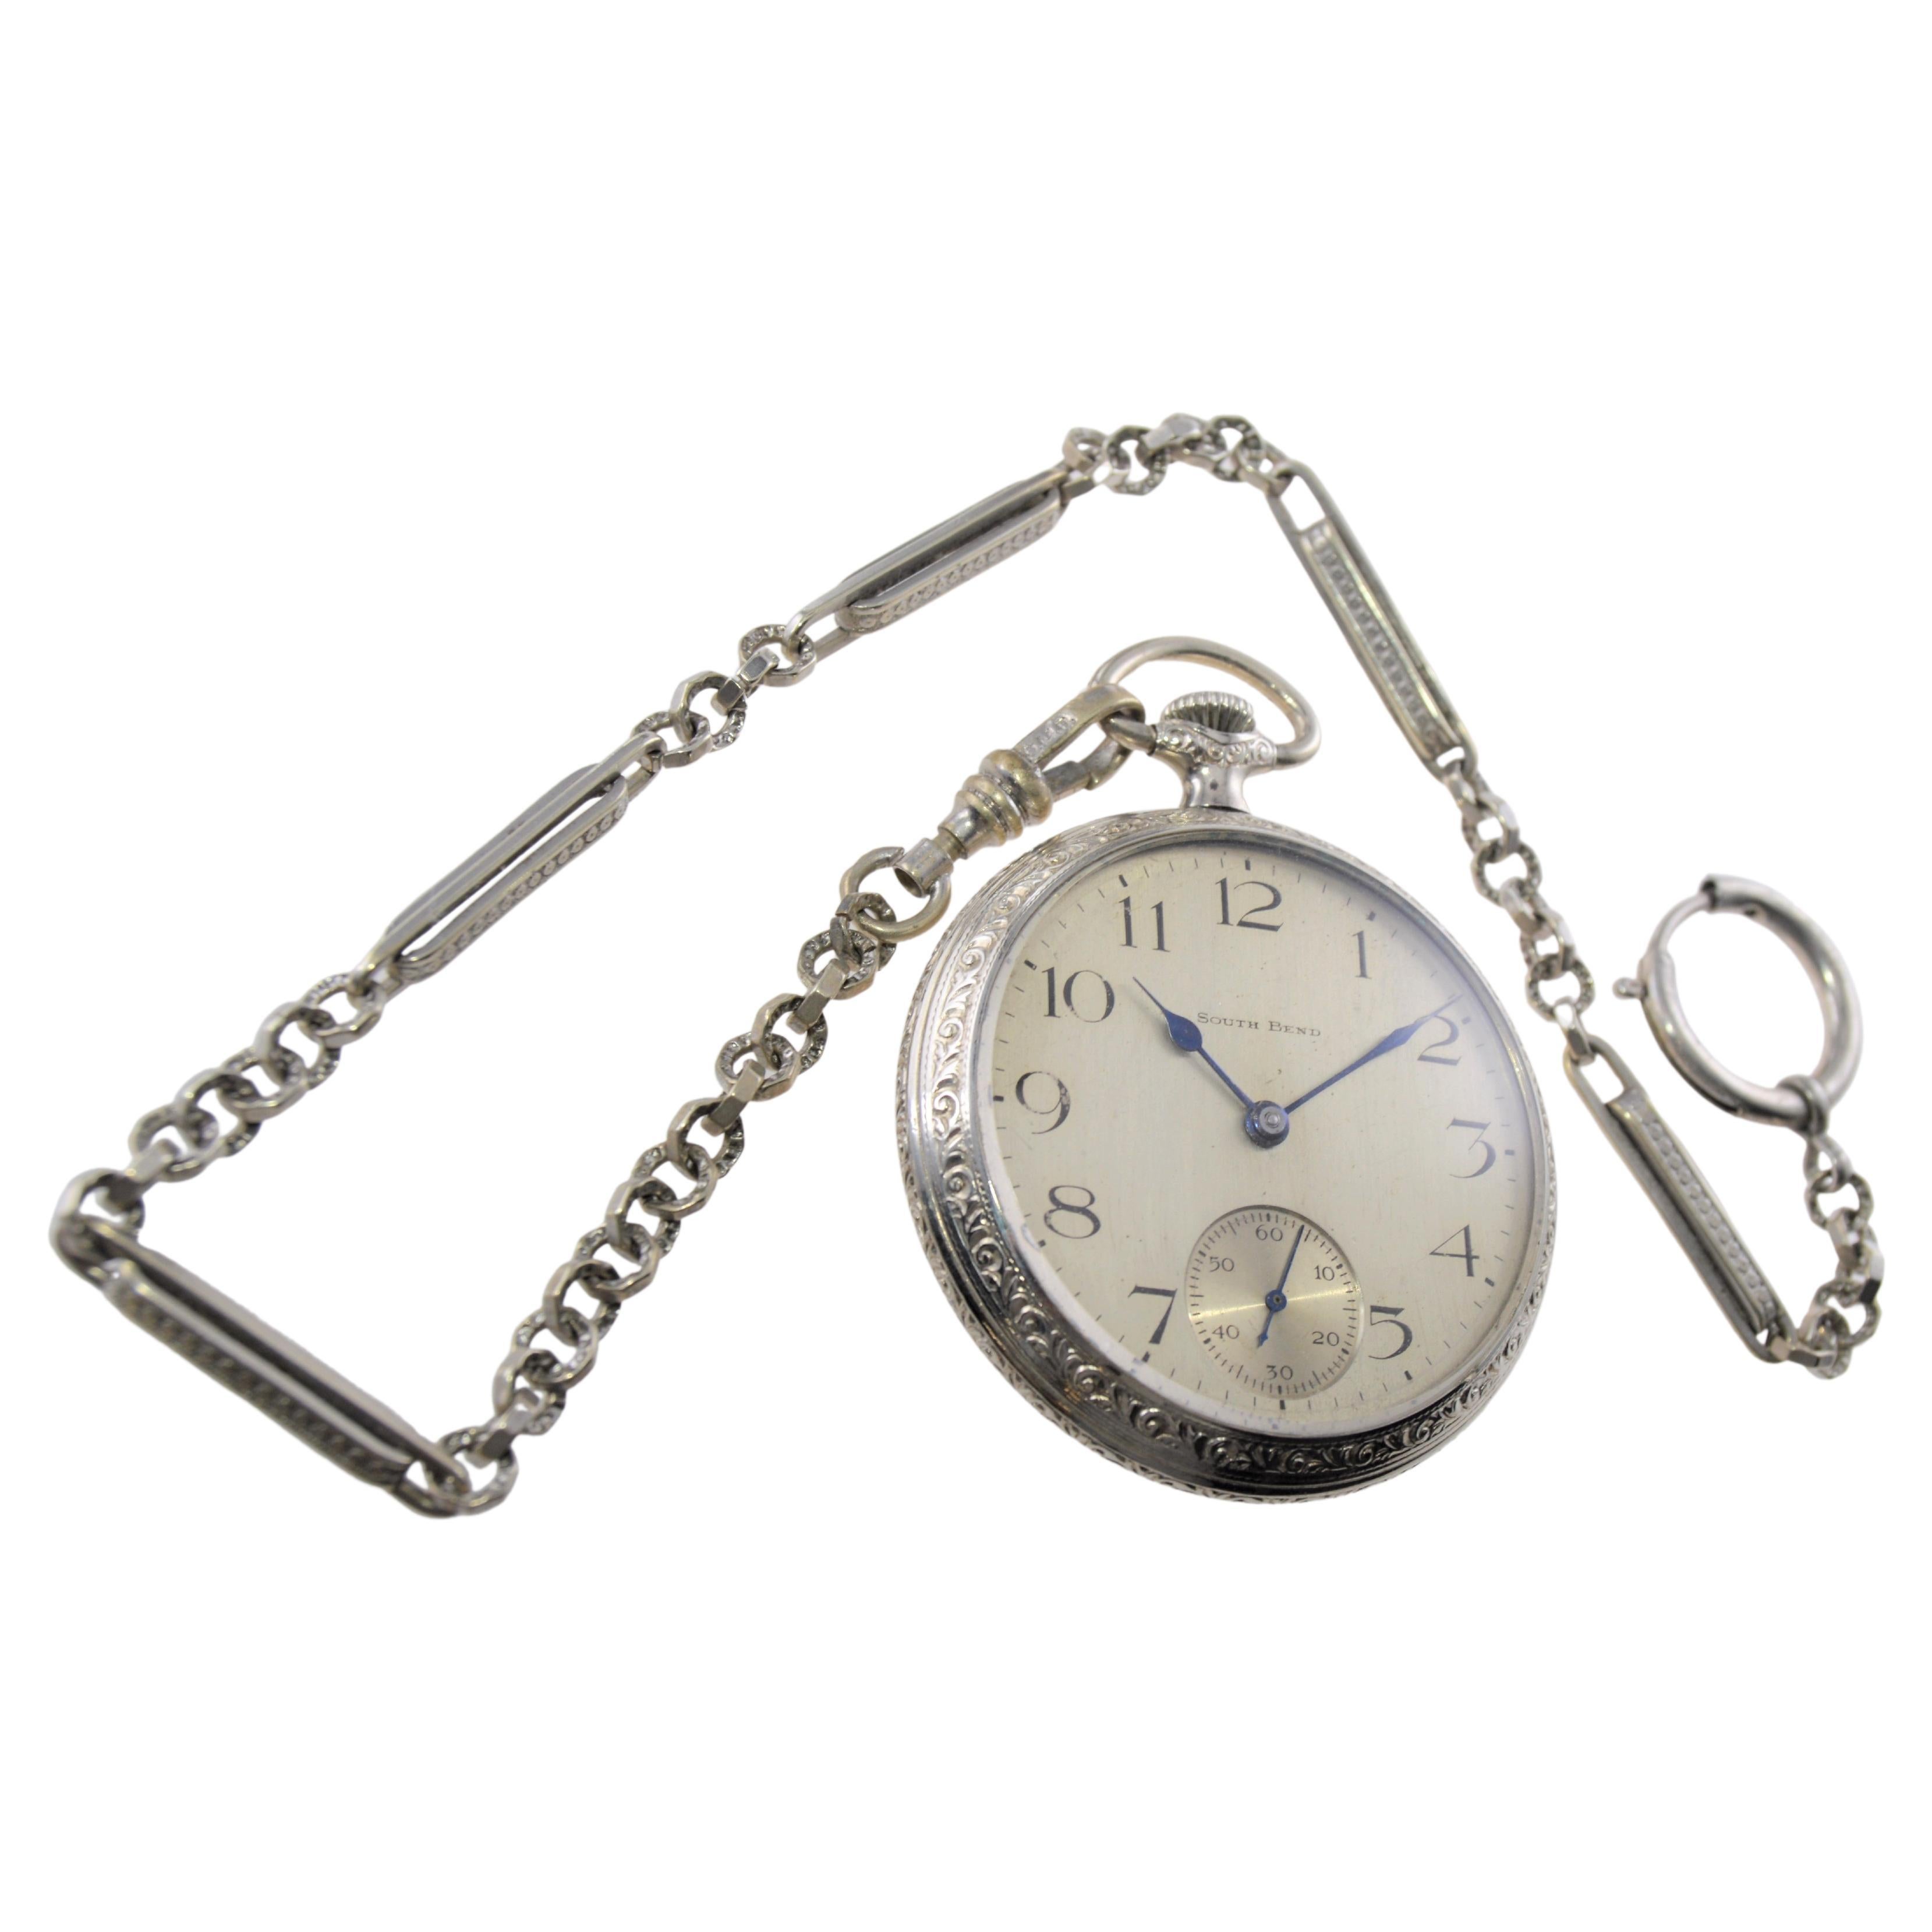 South Bend Open Faced Pocket Watch Gold Filled with Original Silvered Dial 1900 For Sale